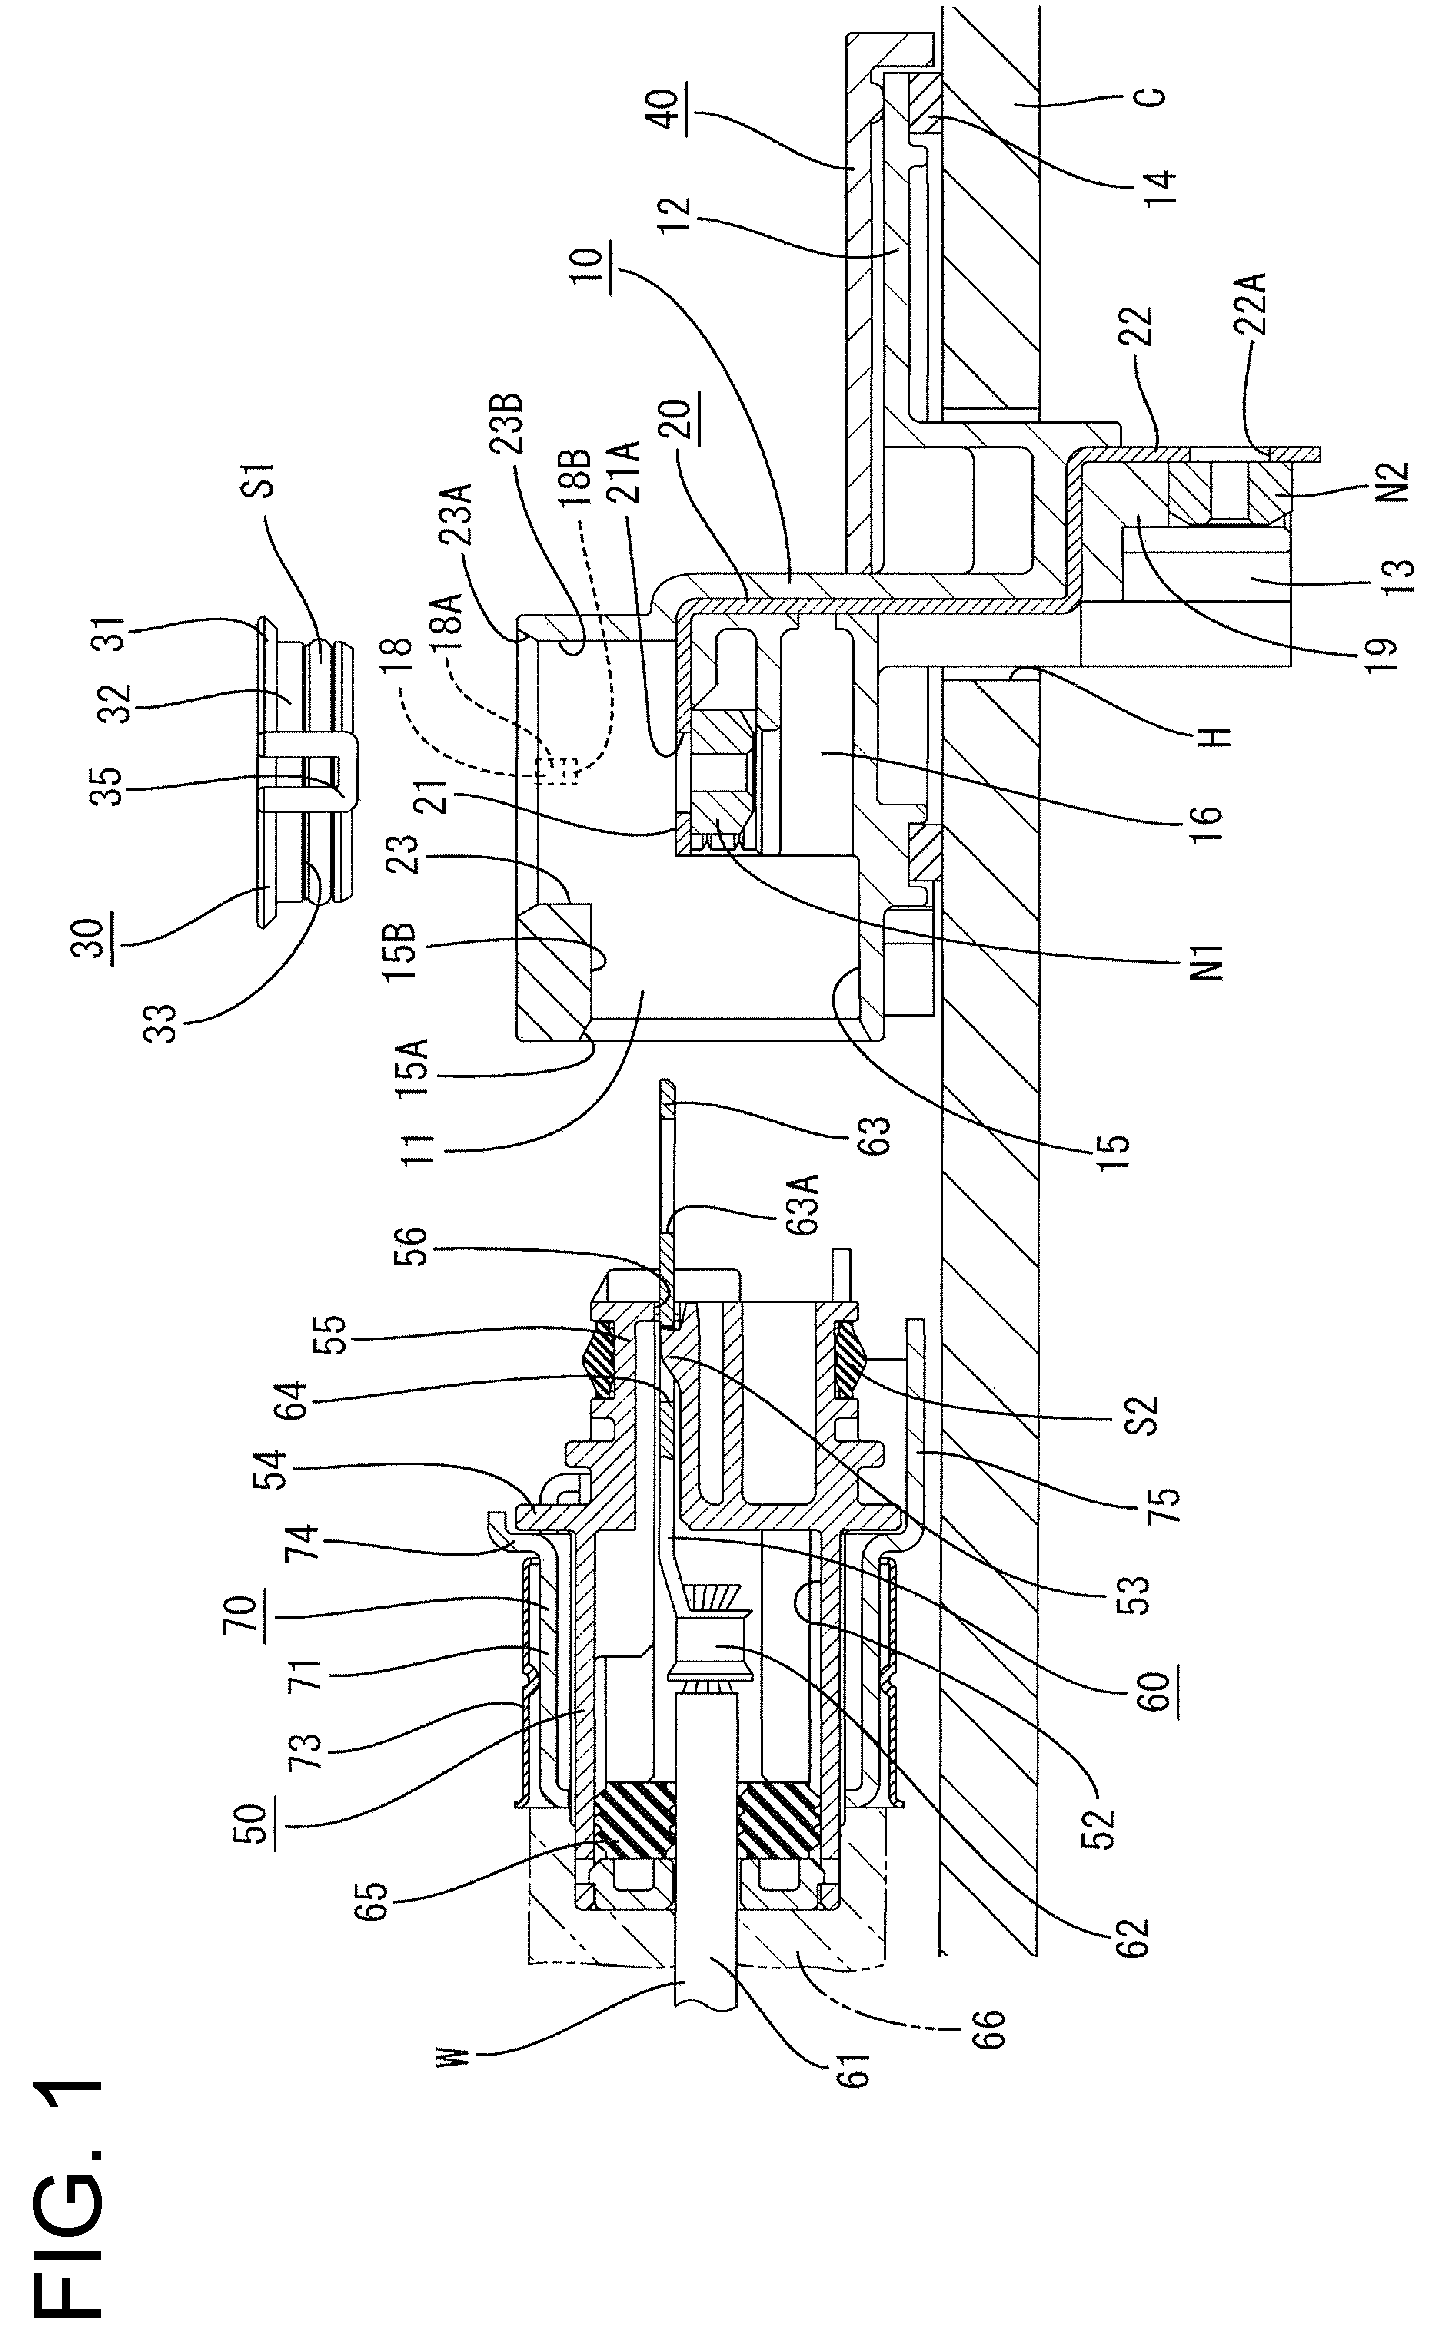 Device connector with mating terminals bolted together